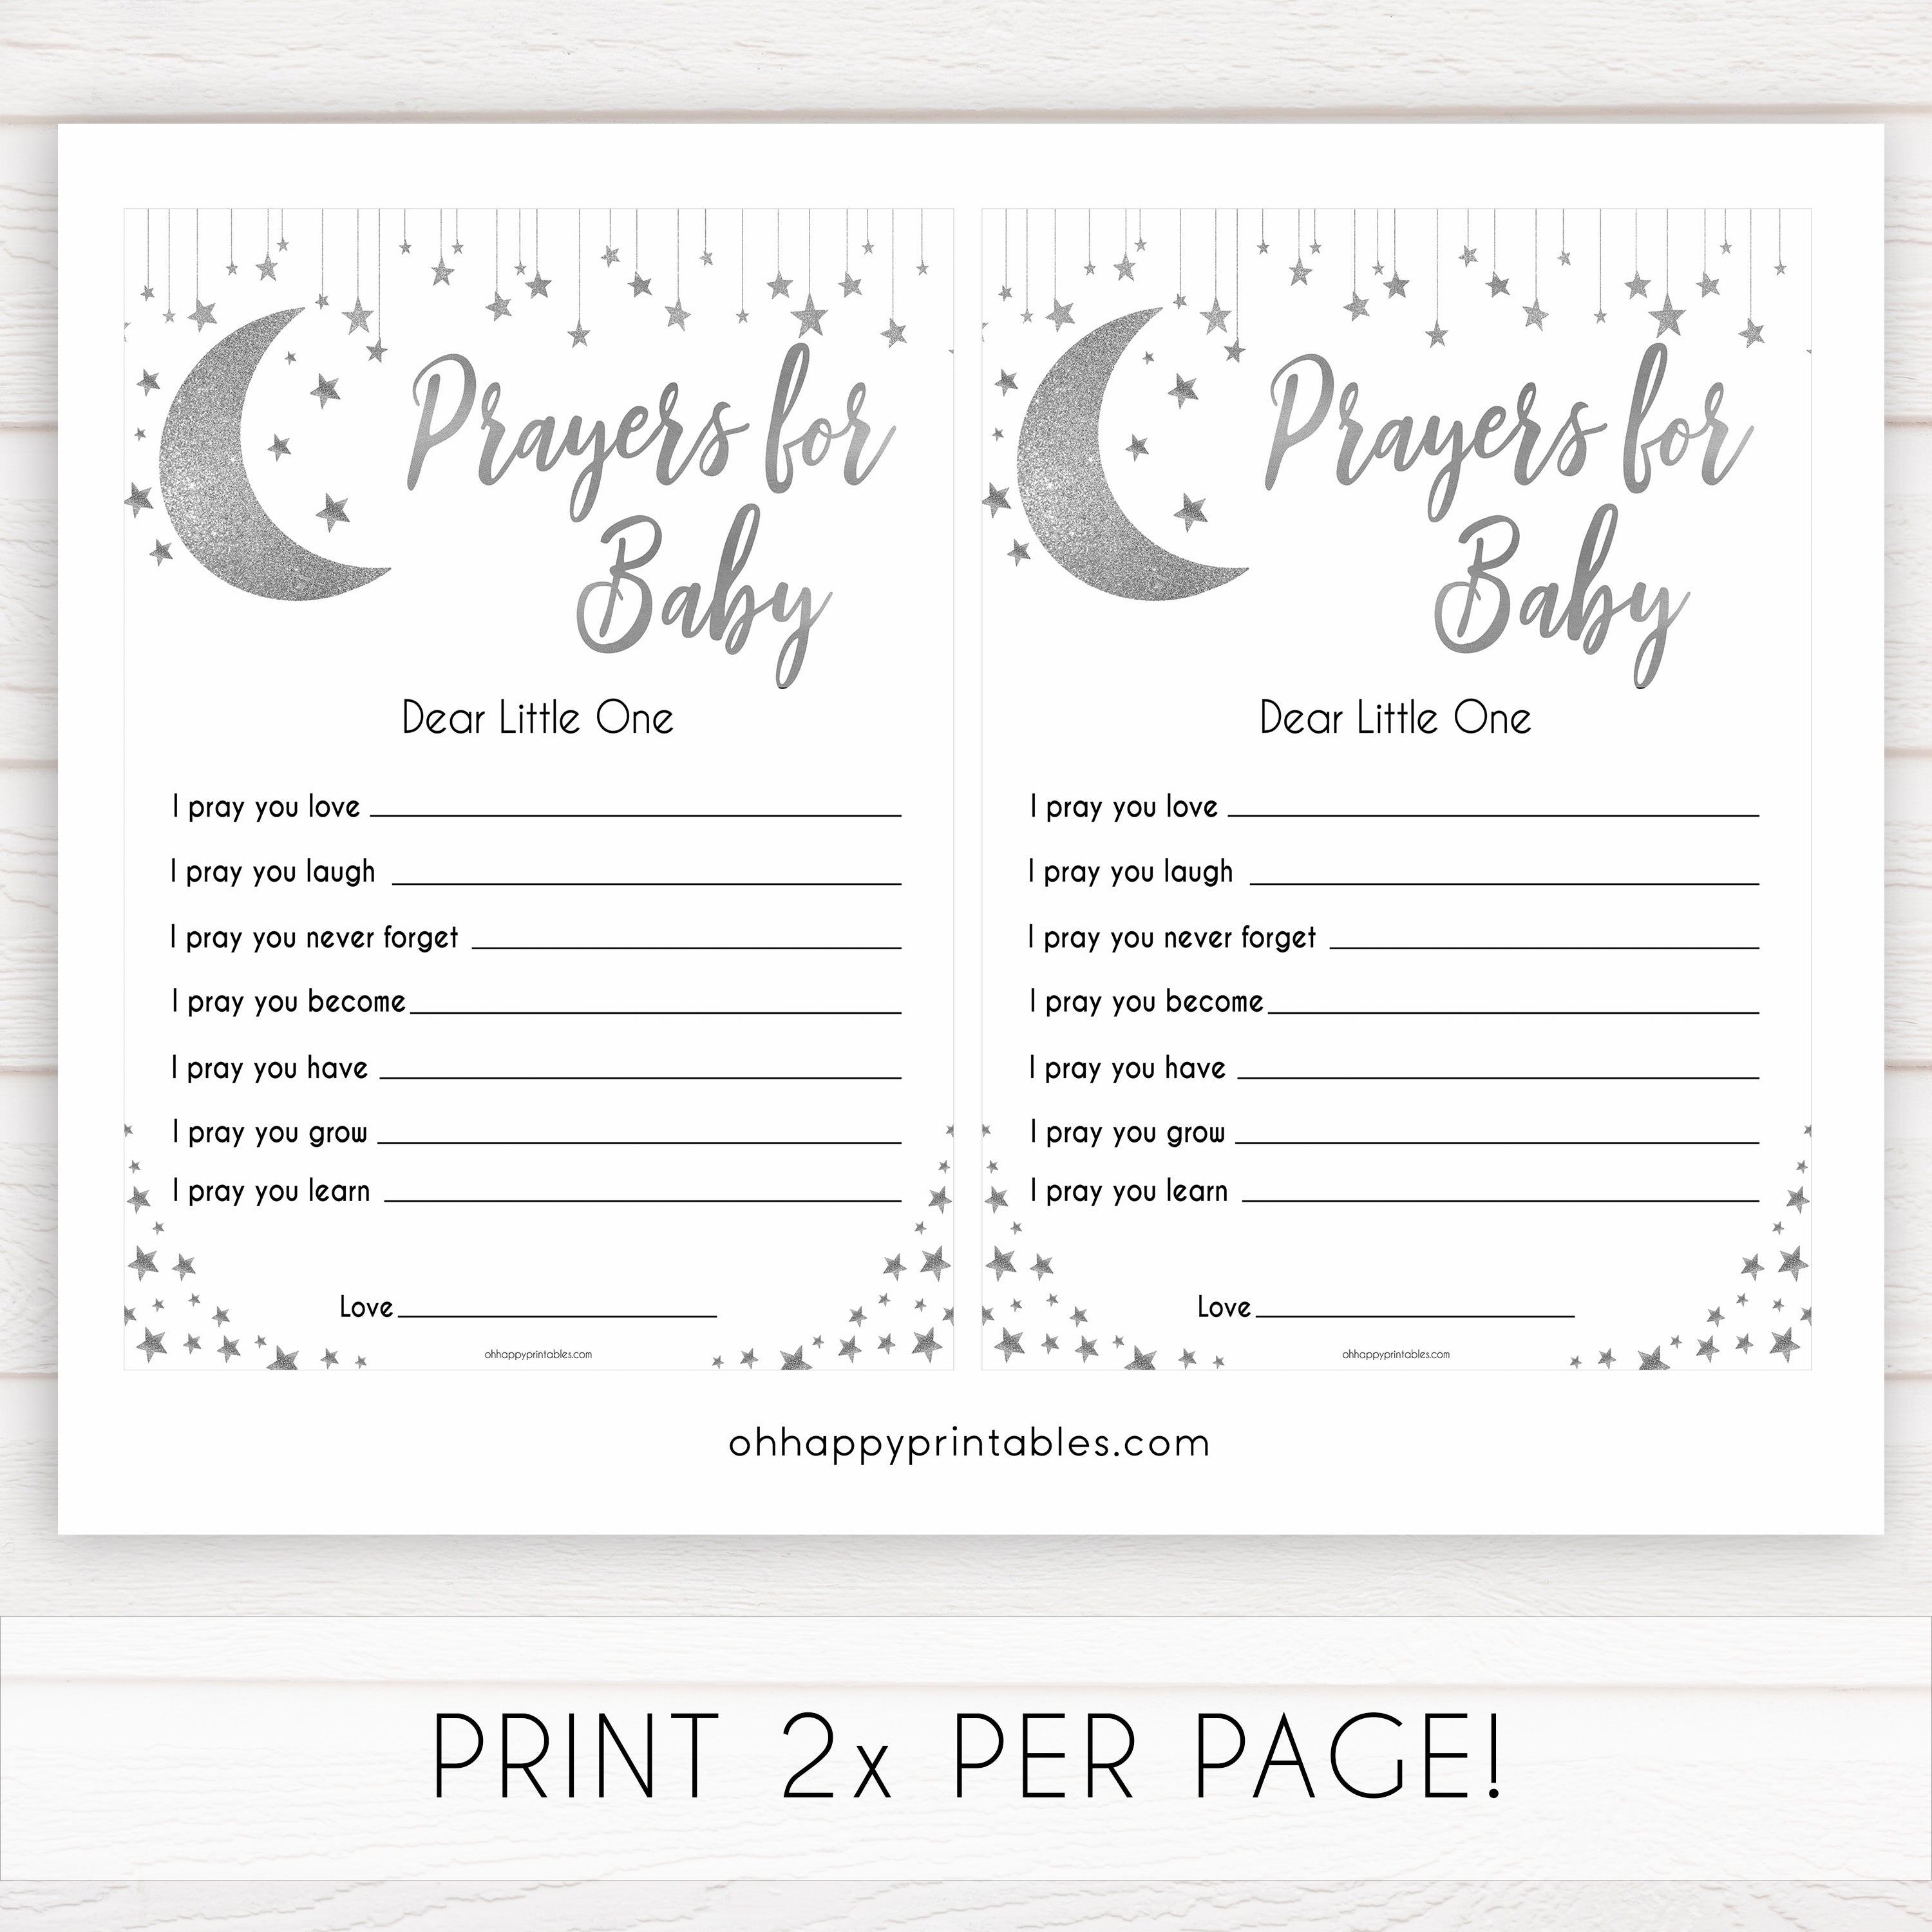 Silver little star, prayers for baby baby games, baby shower games, printable baby games, fun baby games, twinkle little star games, baby games, fun baby shower ideas, baby shower ideas